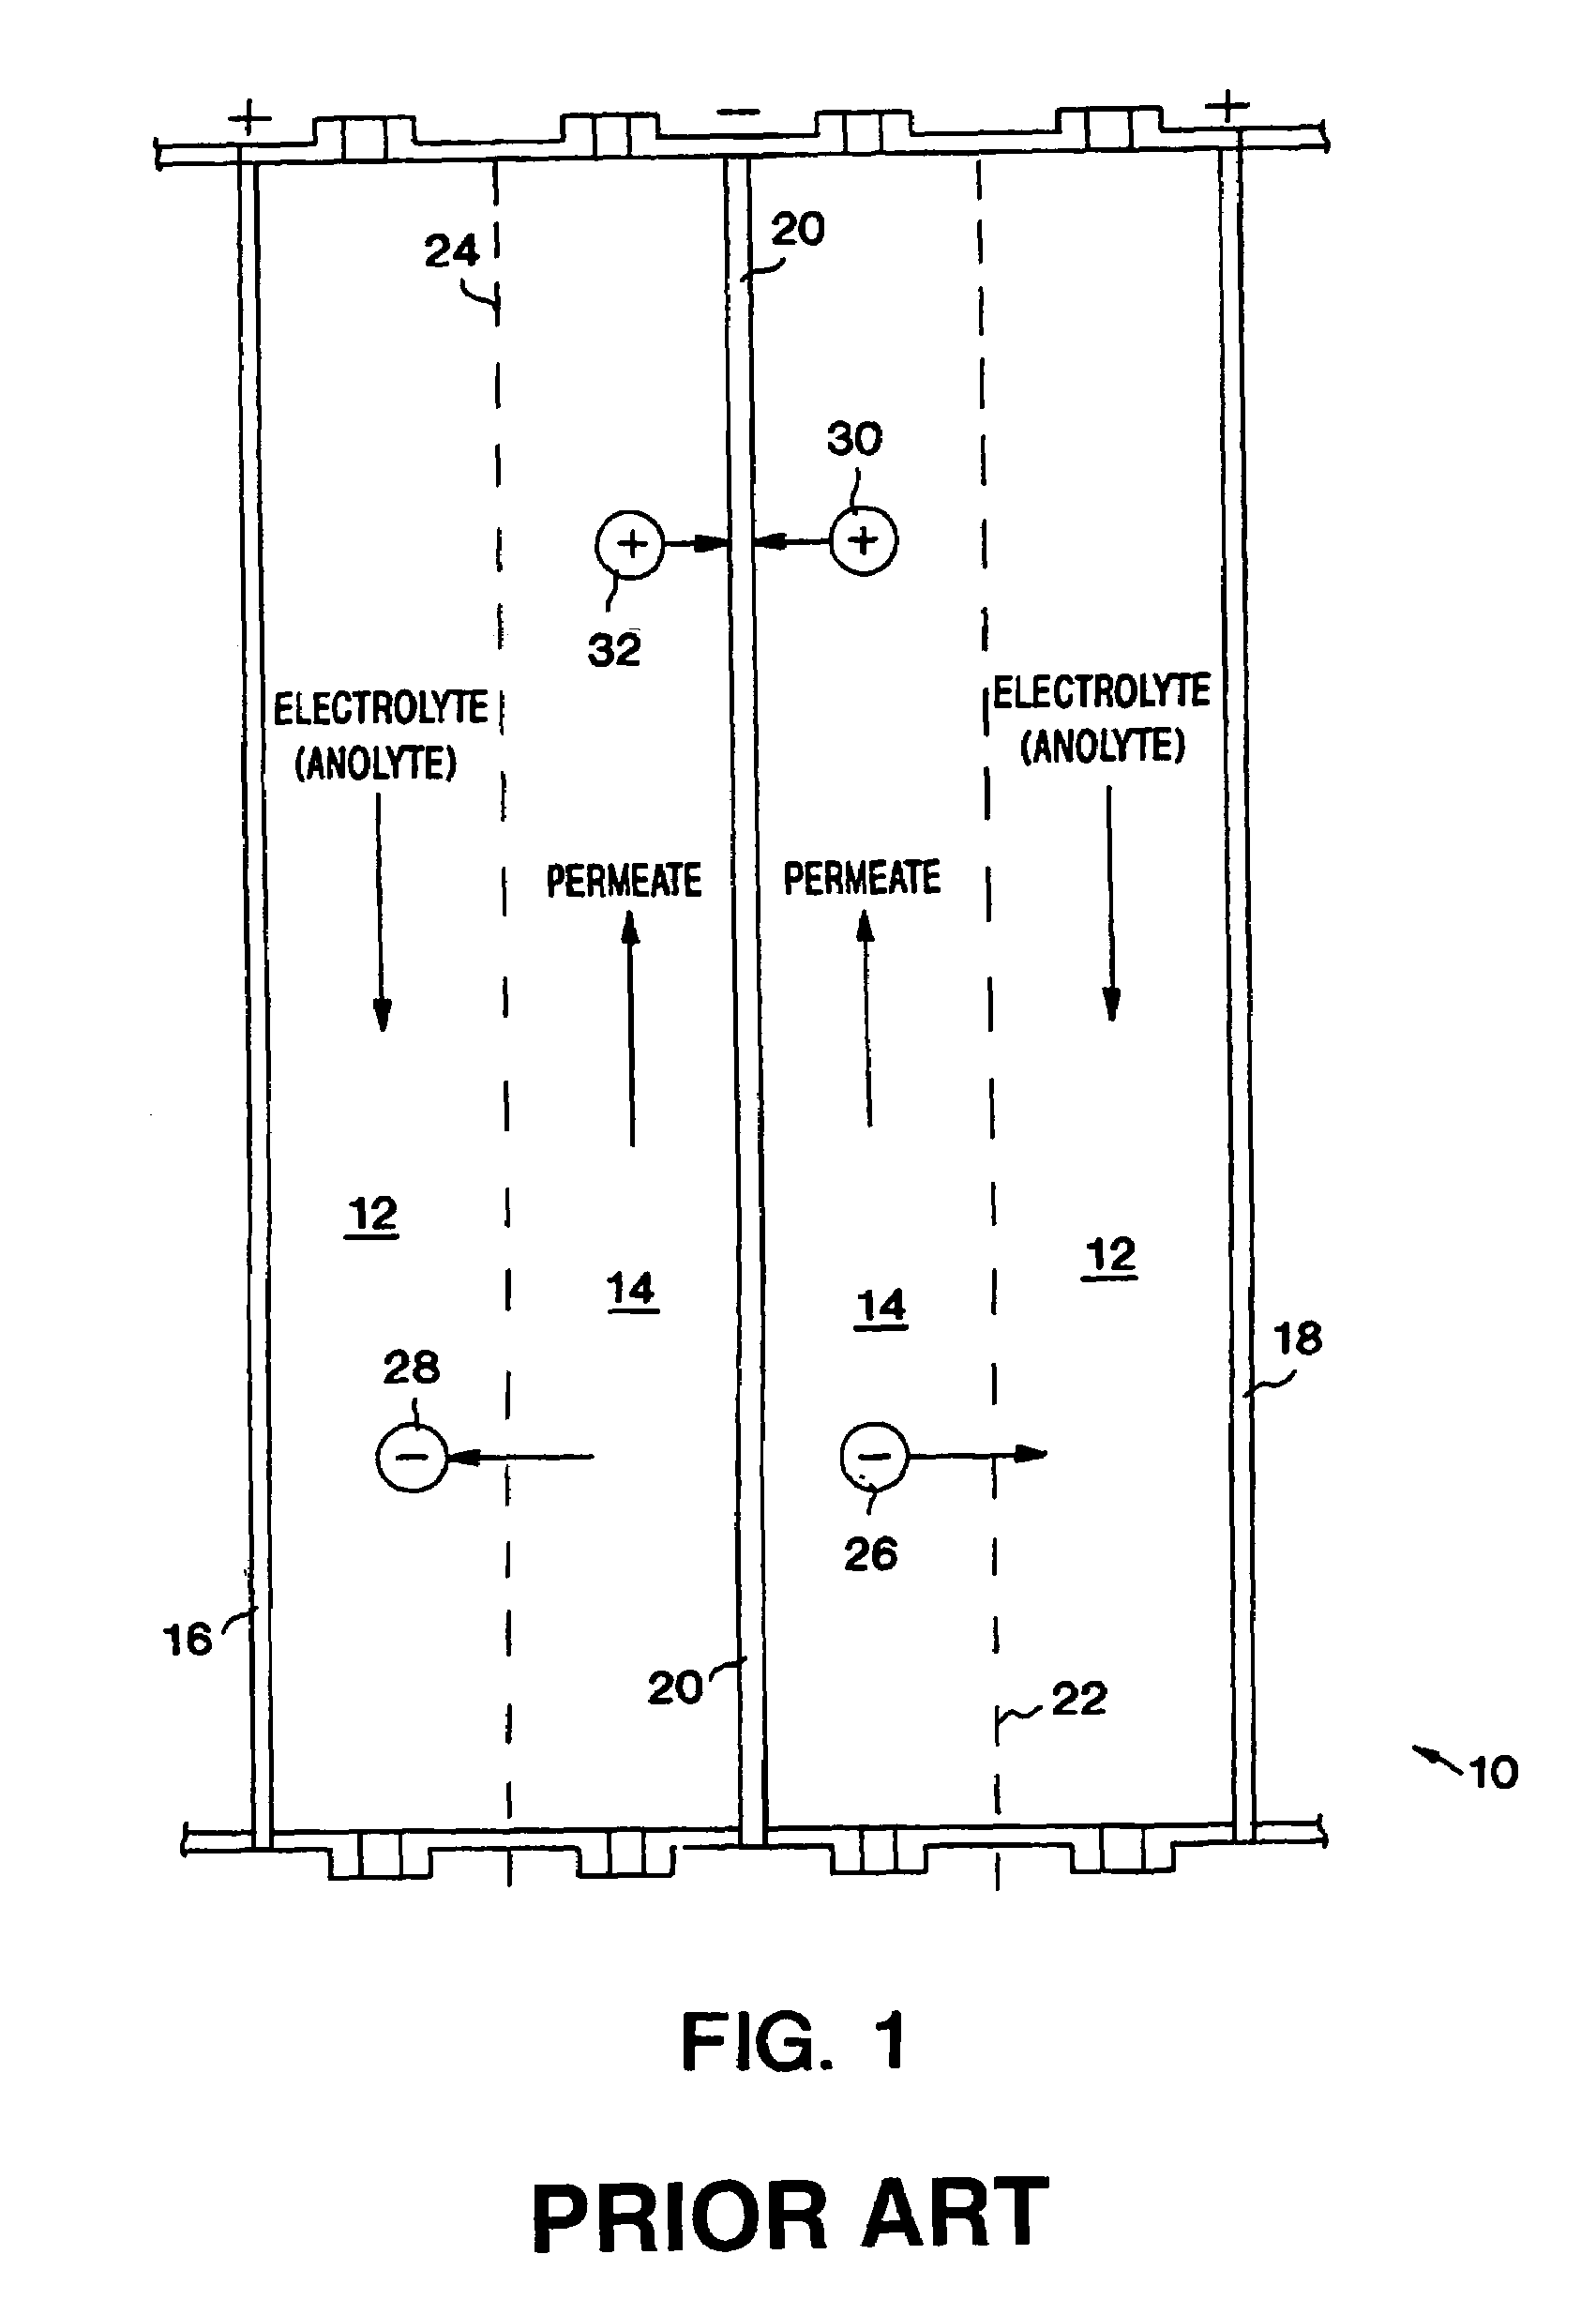 Device and process for electrodialysis of ultrafiltration premeate of electrocoat paint